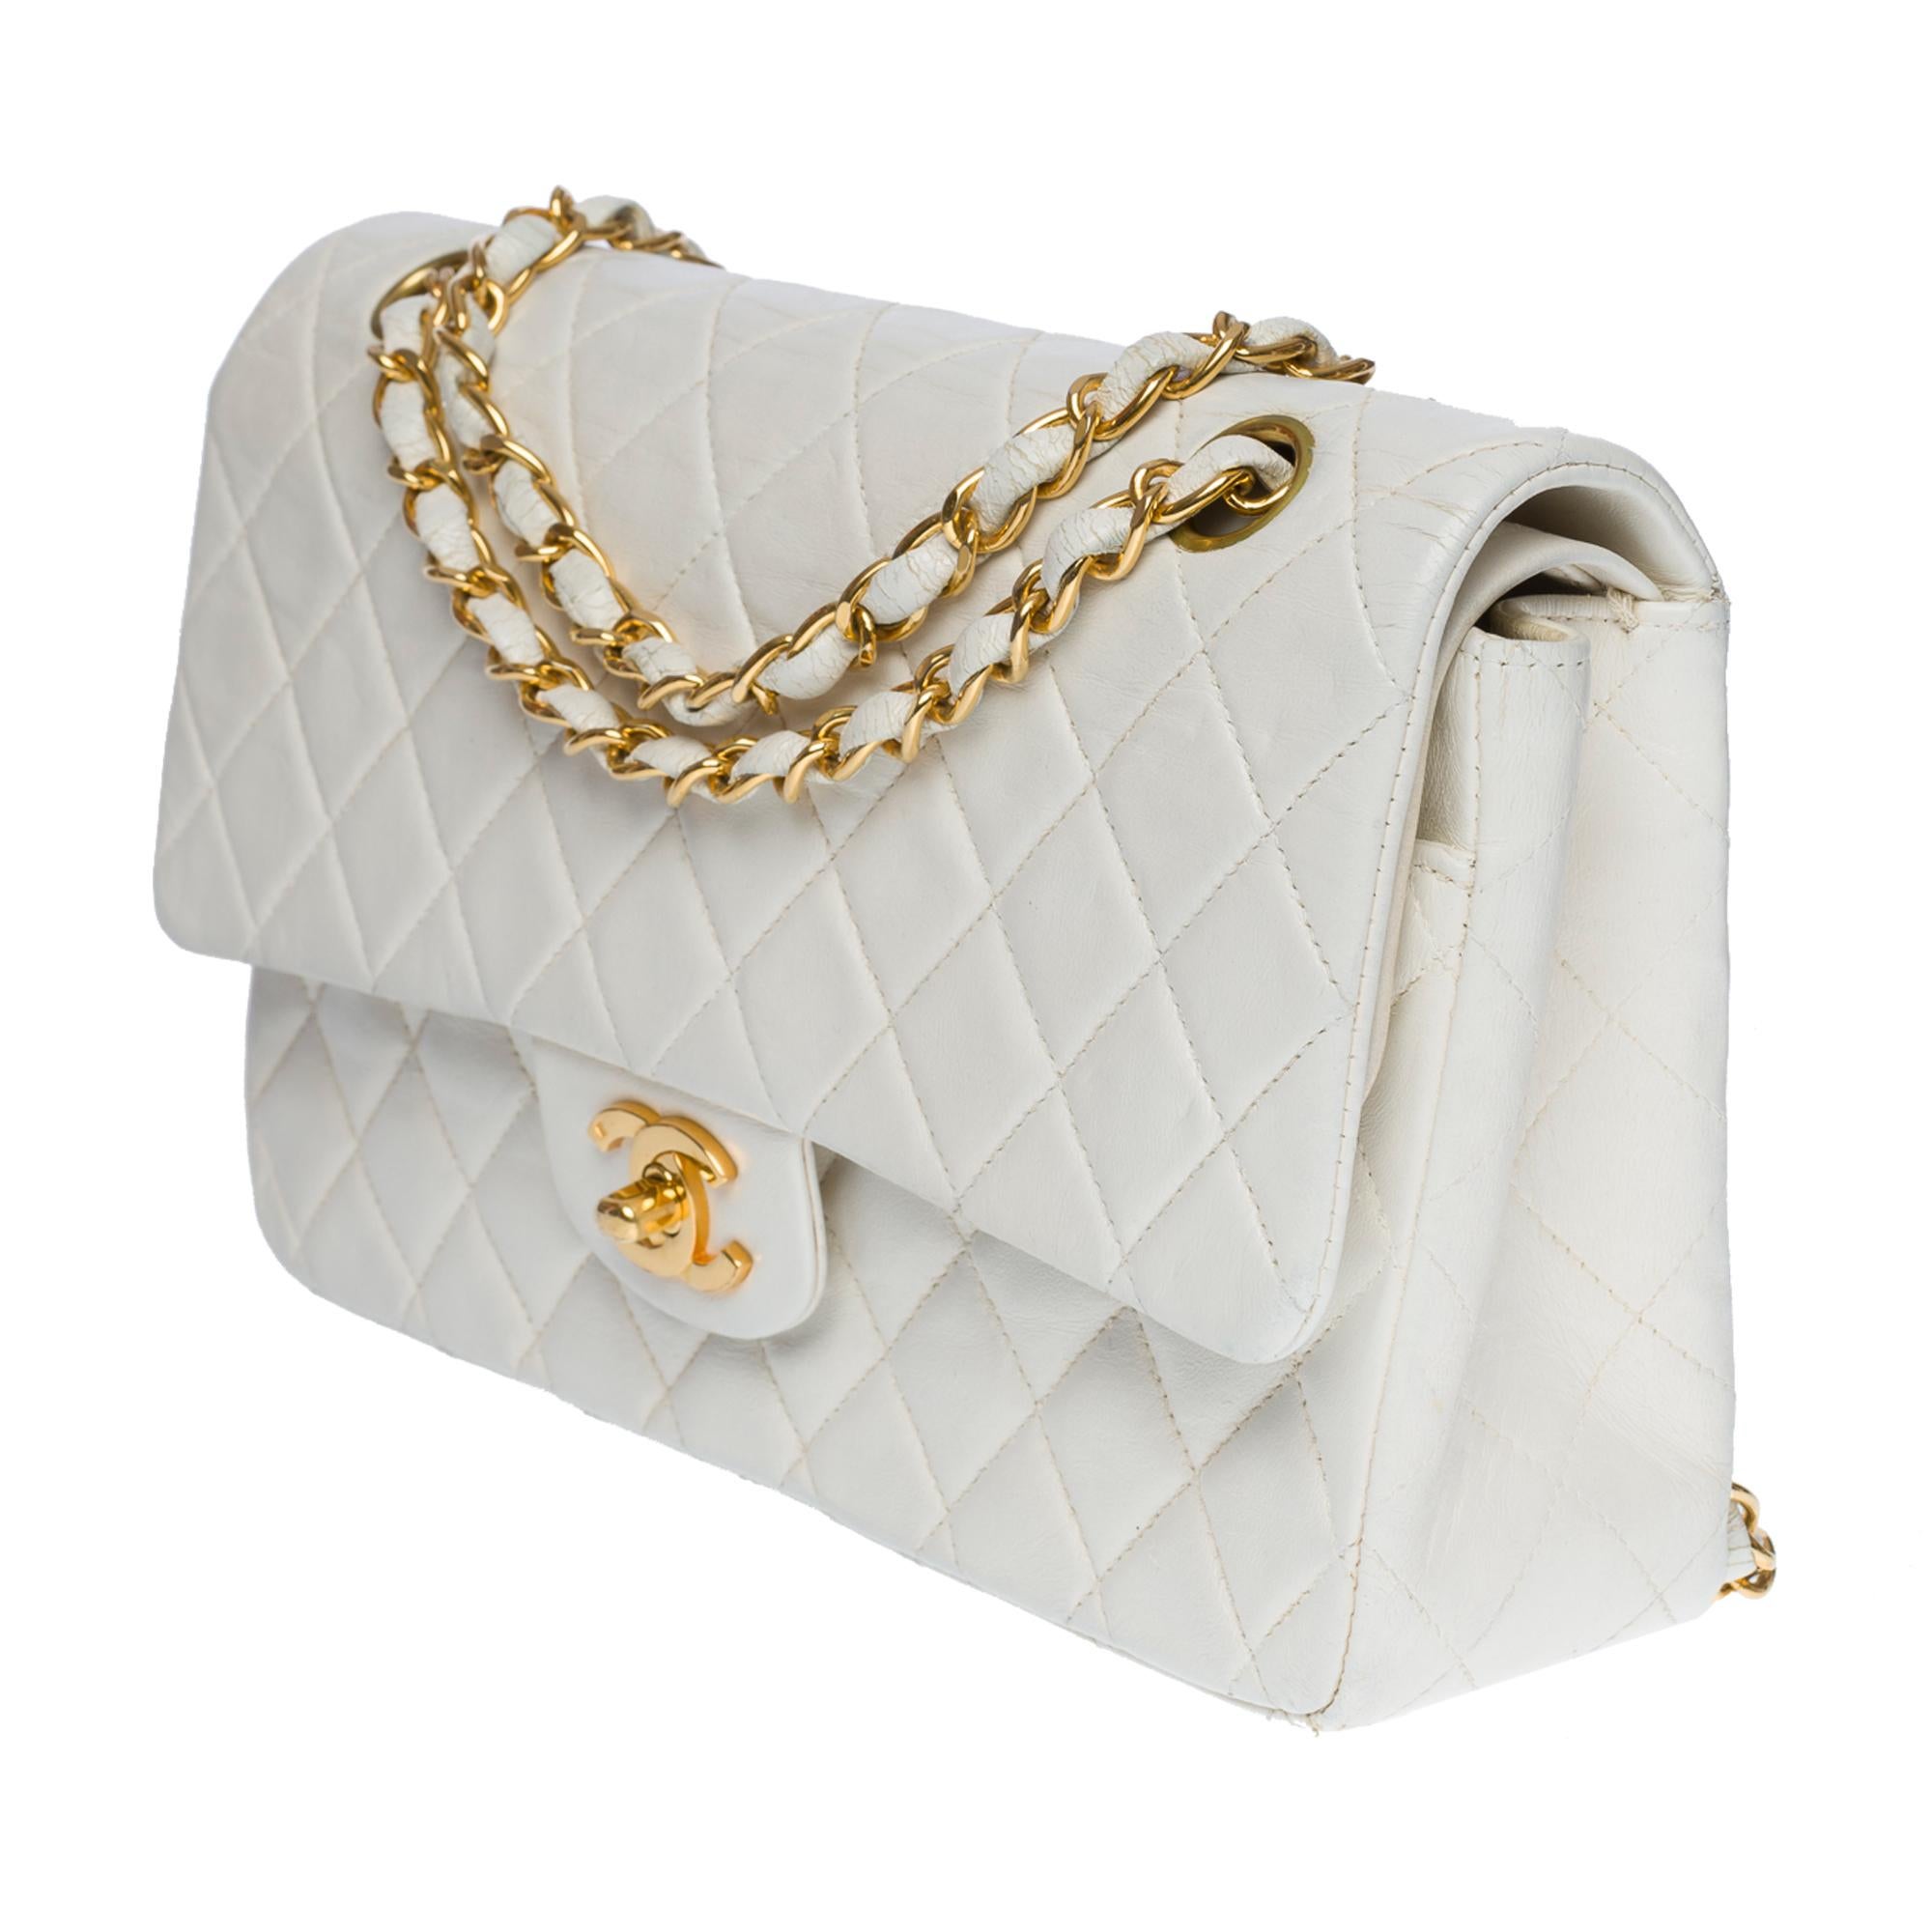 Women's Chanel Timeless Medium double flap Shoulder bag in White quilted lambskin, GHW